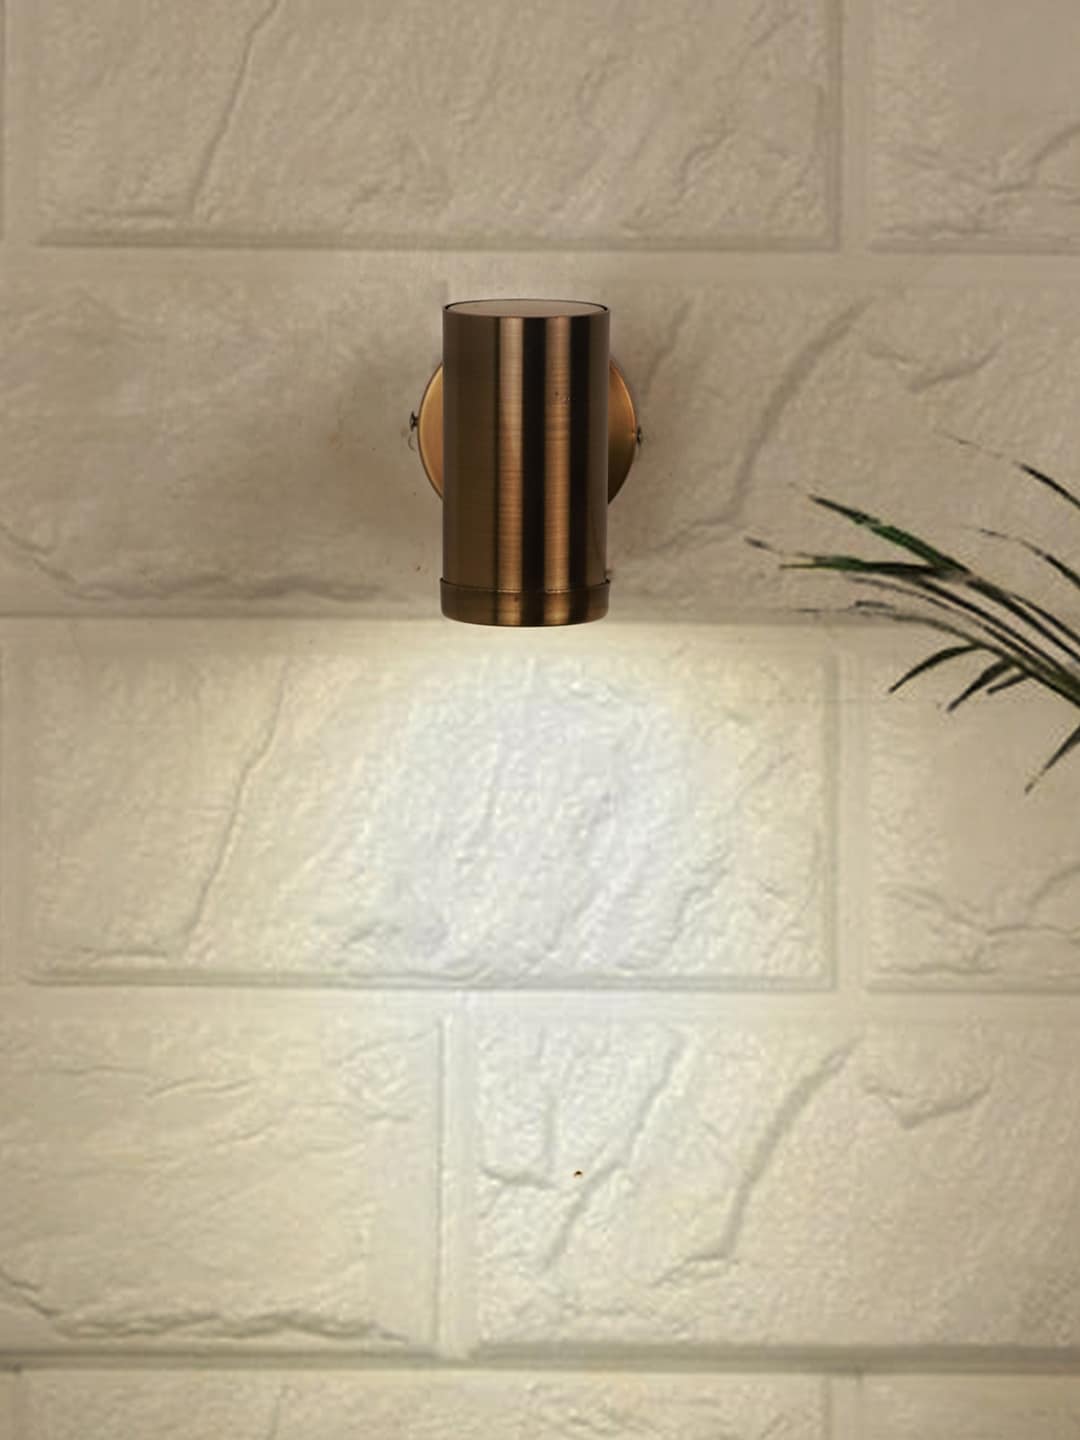 Fos Lighting Bronze-Toned Brass Finished Bedside Cylindrical Wall Lamp Price in India